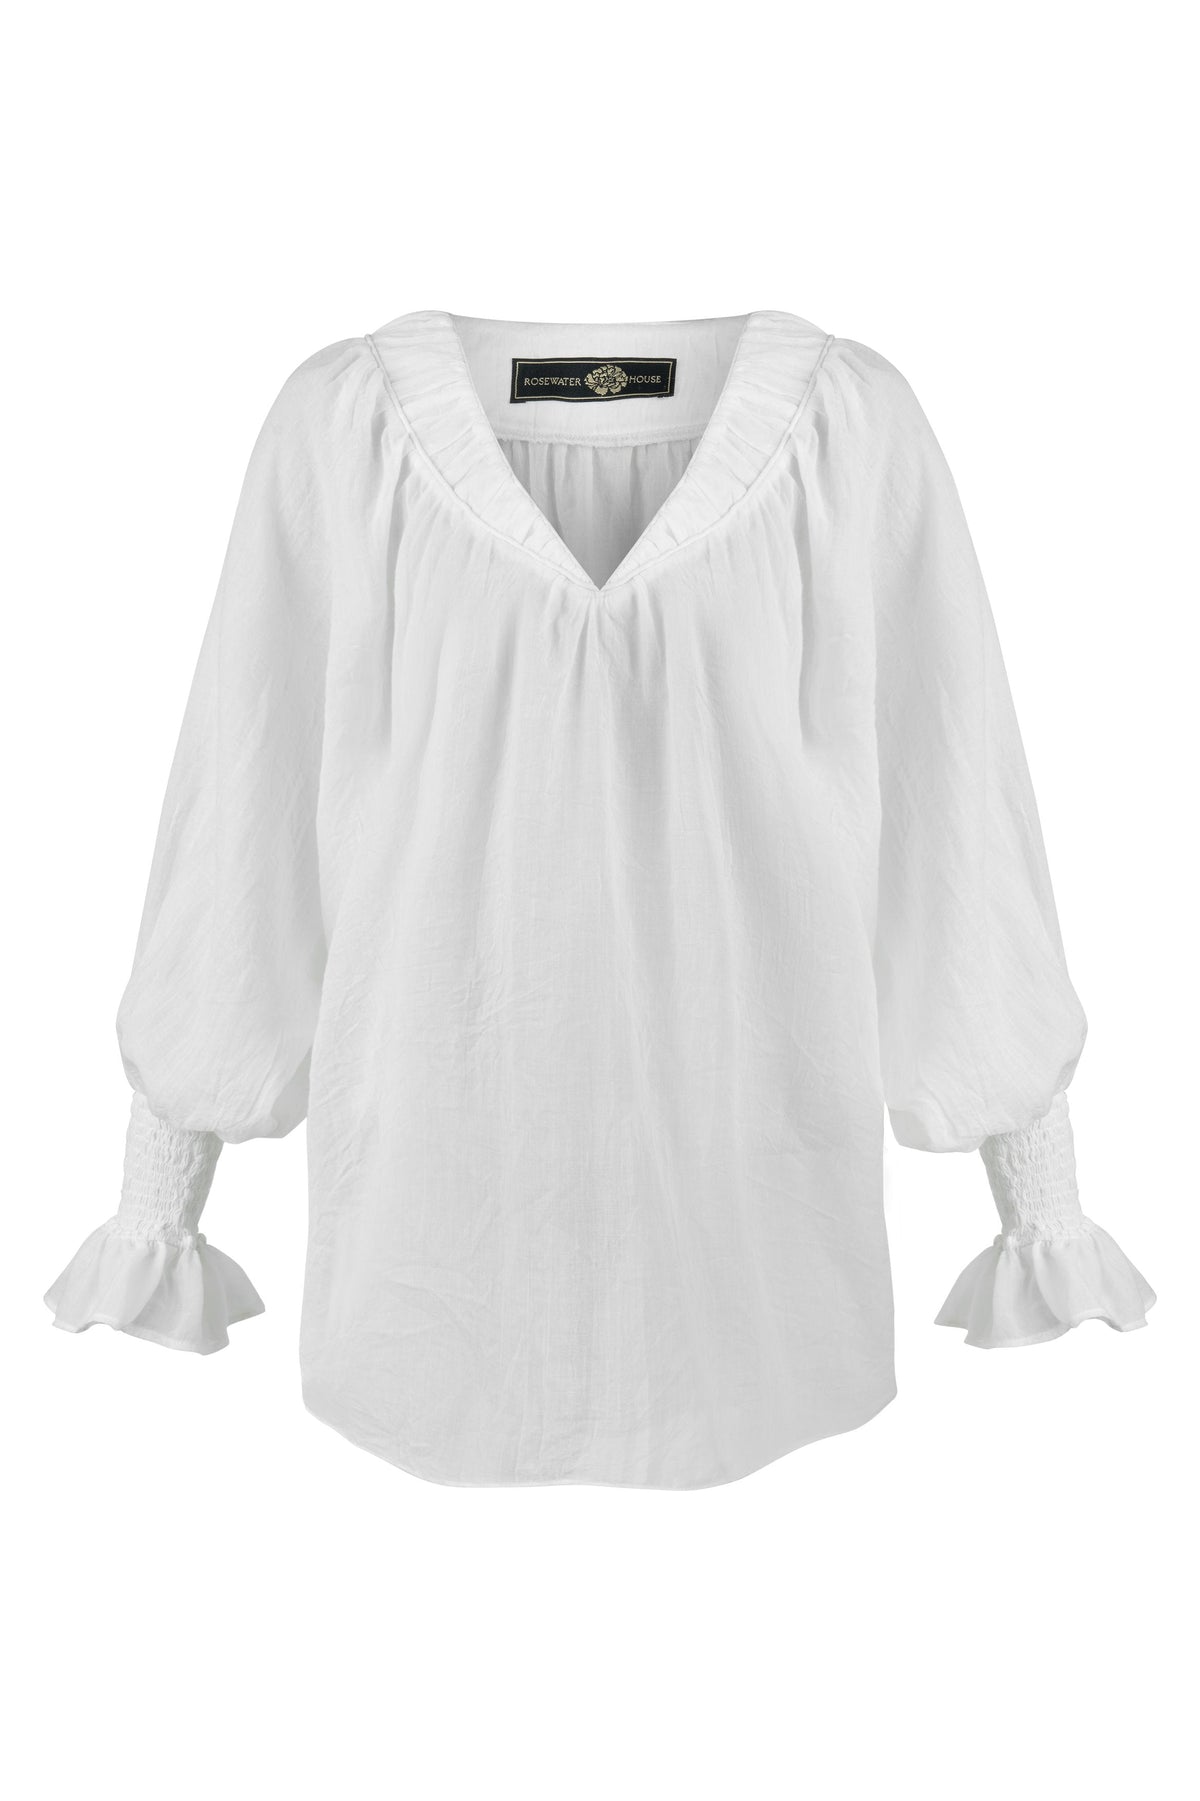 Gol Blouse - White Tops - Blouse Rosewater House